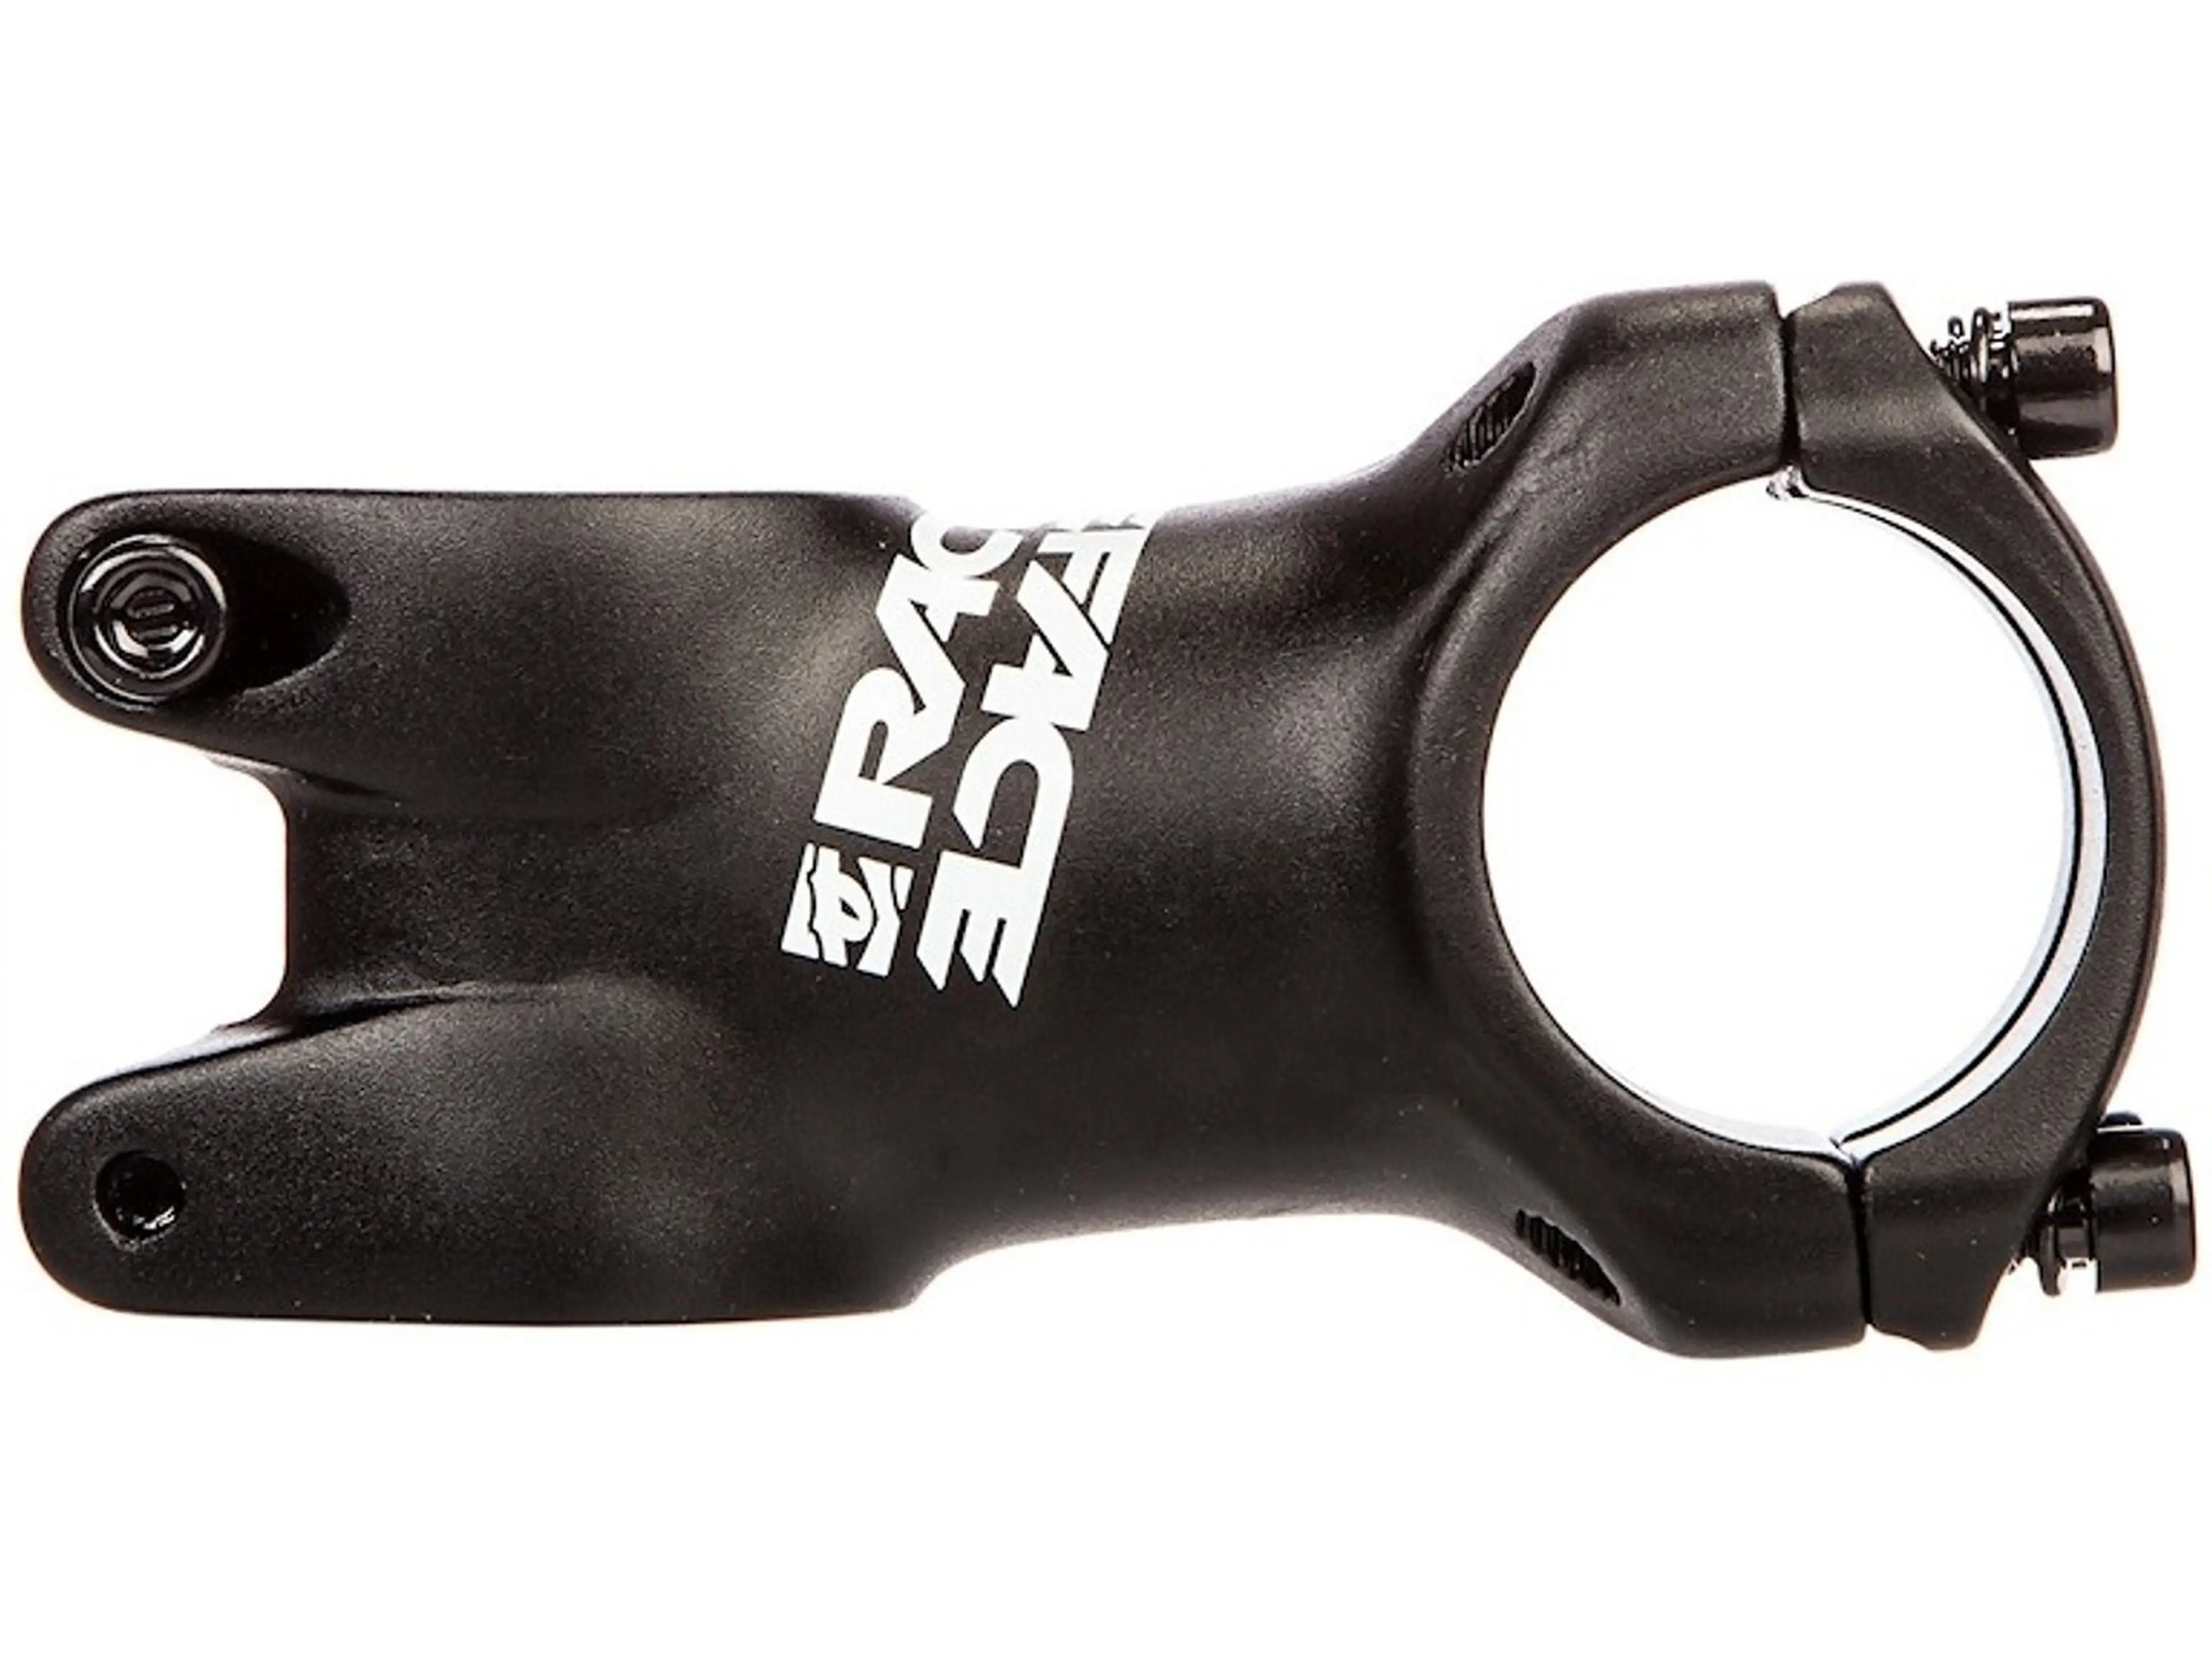 6. Pipe Race Face Ride XC prindere 31.8mm noi